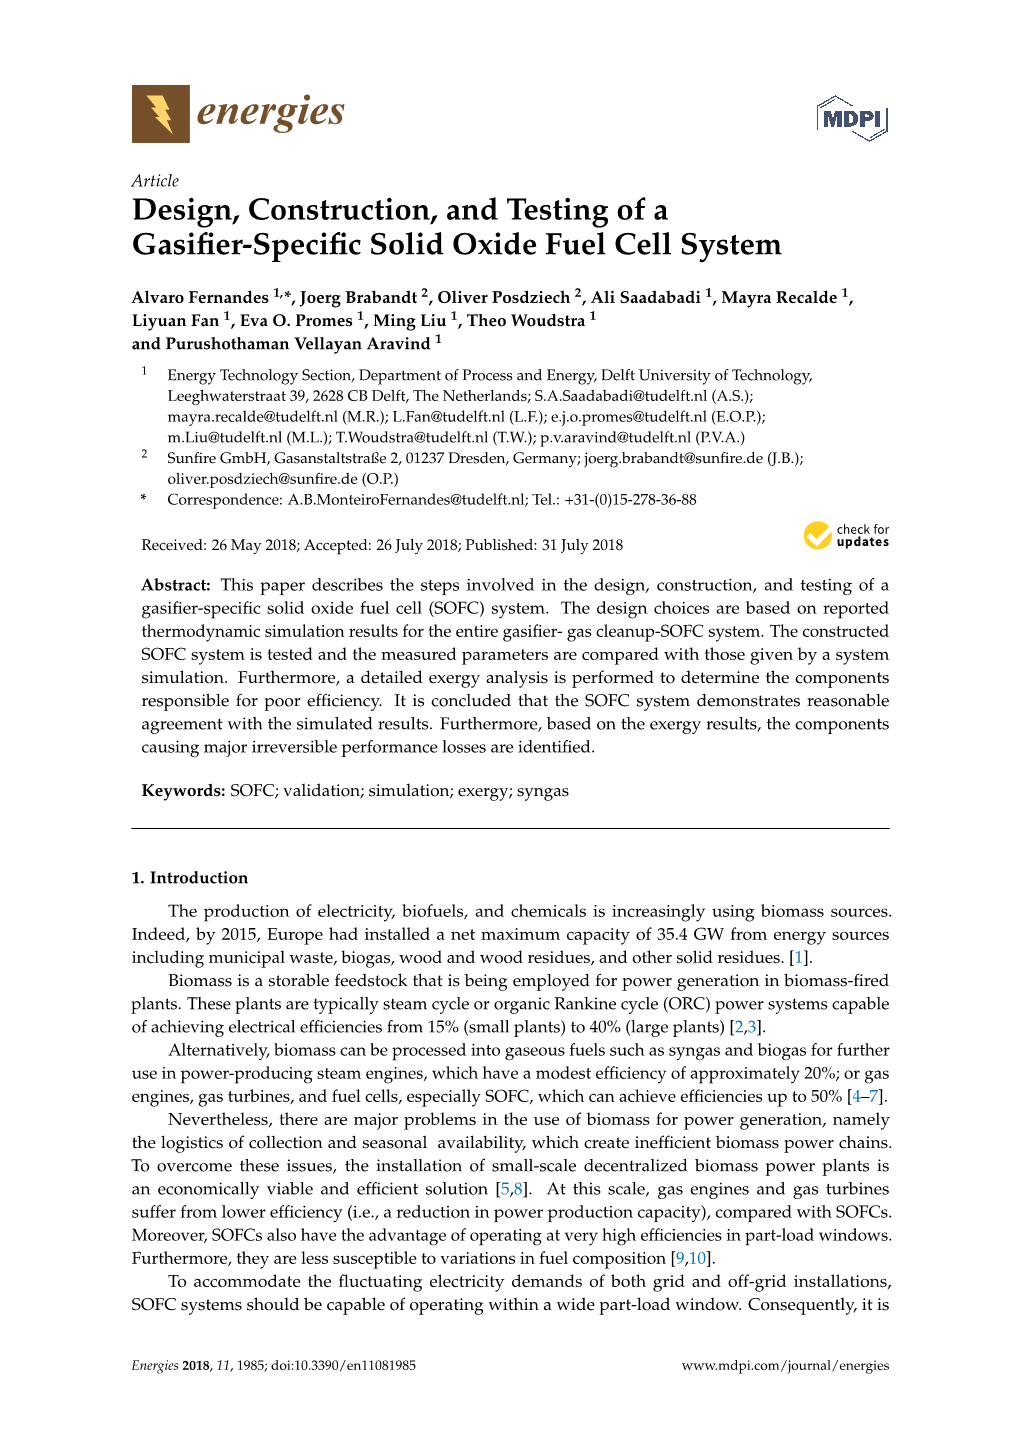 Design, Construction, and Testing of a Gasifier-Specific Solid Oxide Fuel